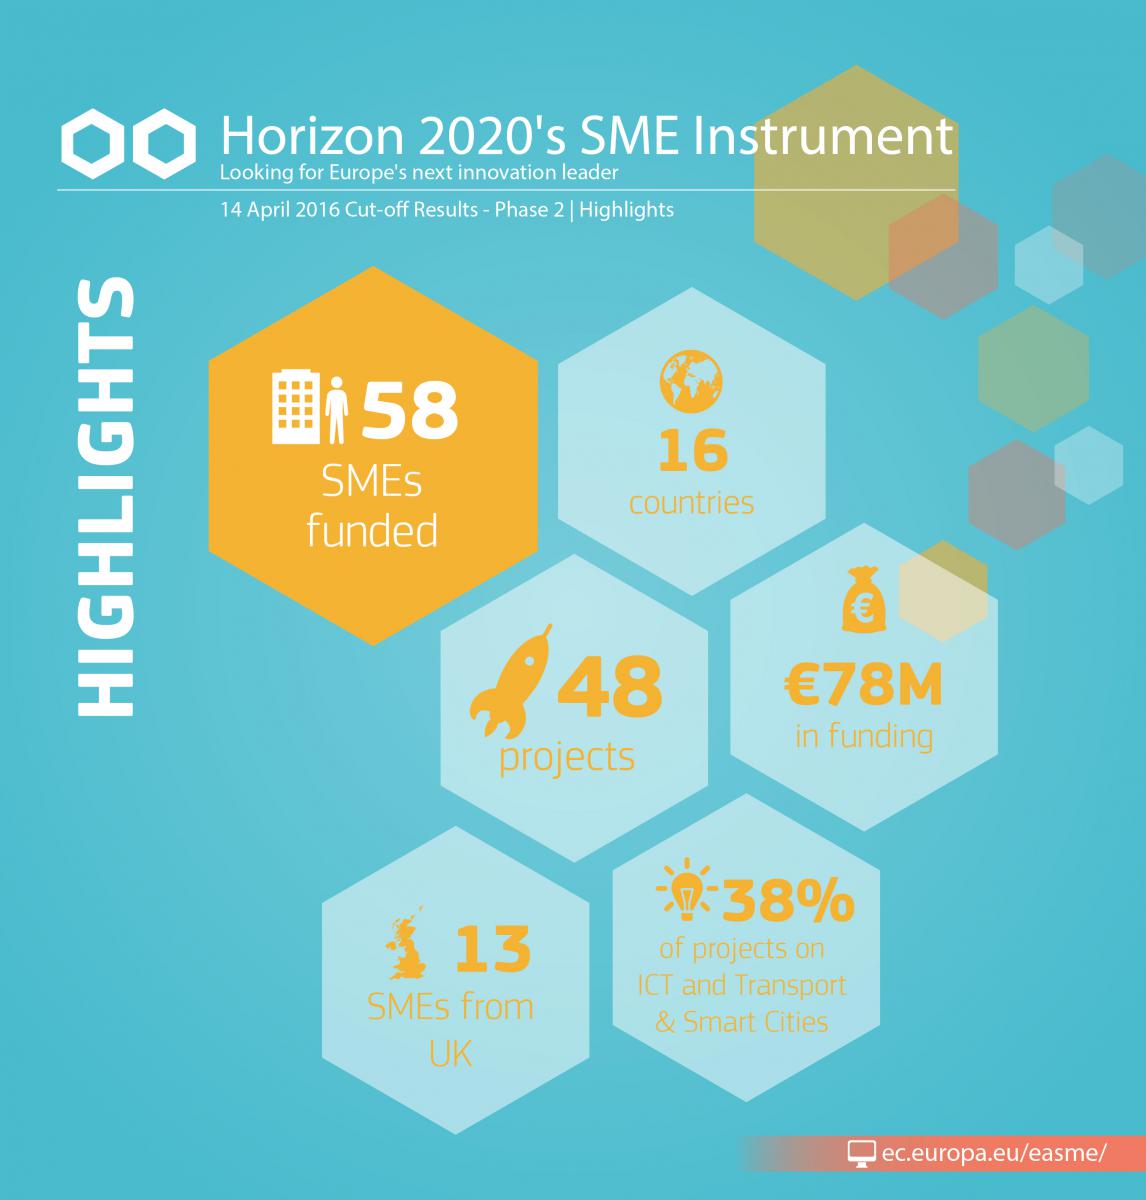 Highlights of SME's Instrument in 2016